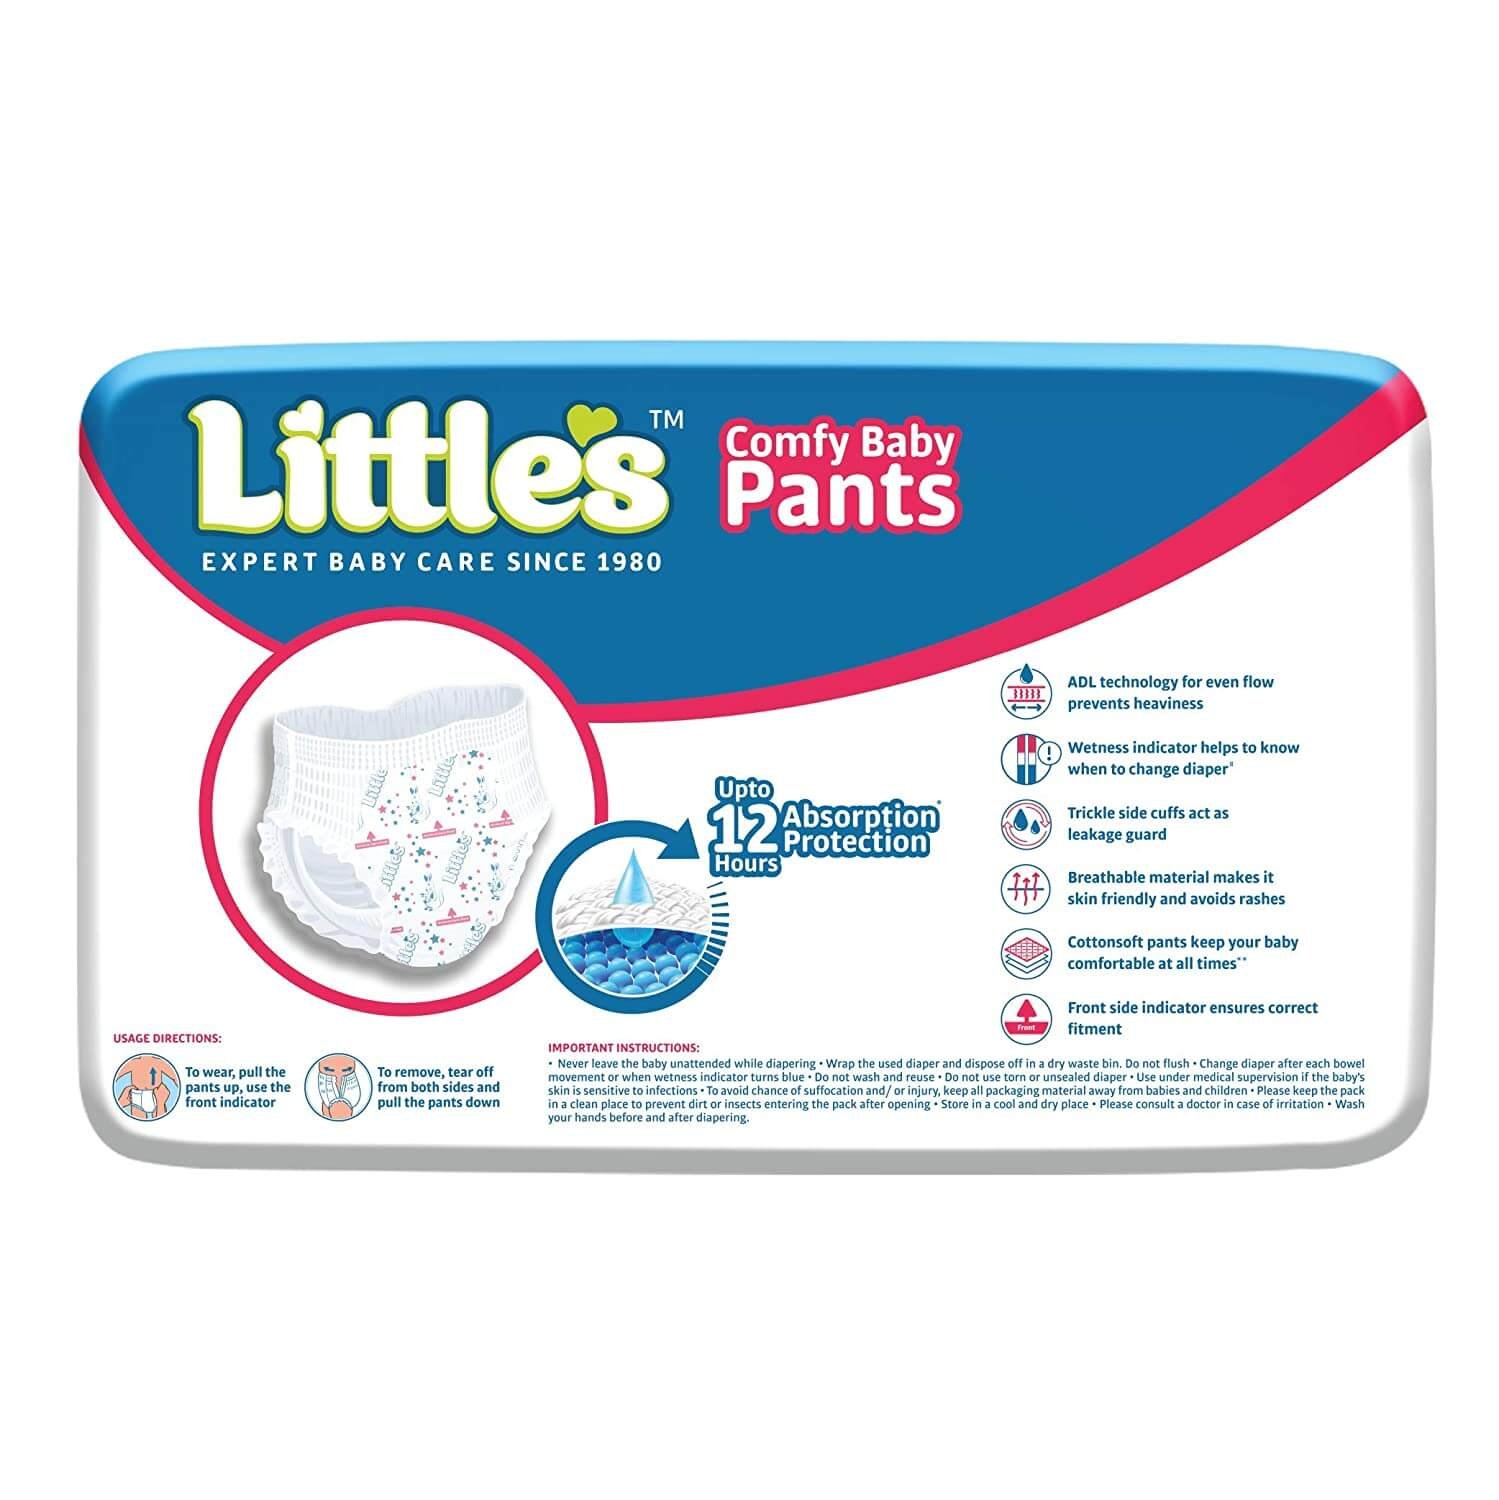 https://shoppingyatra.com/product_images/Little's Baby Pants Diapers with Wetness Indicator and 12 Hours Absorption, Large (L), 9-14 kg, 60 Count2.jpg